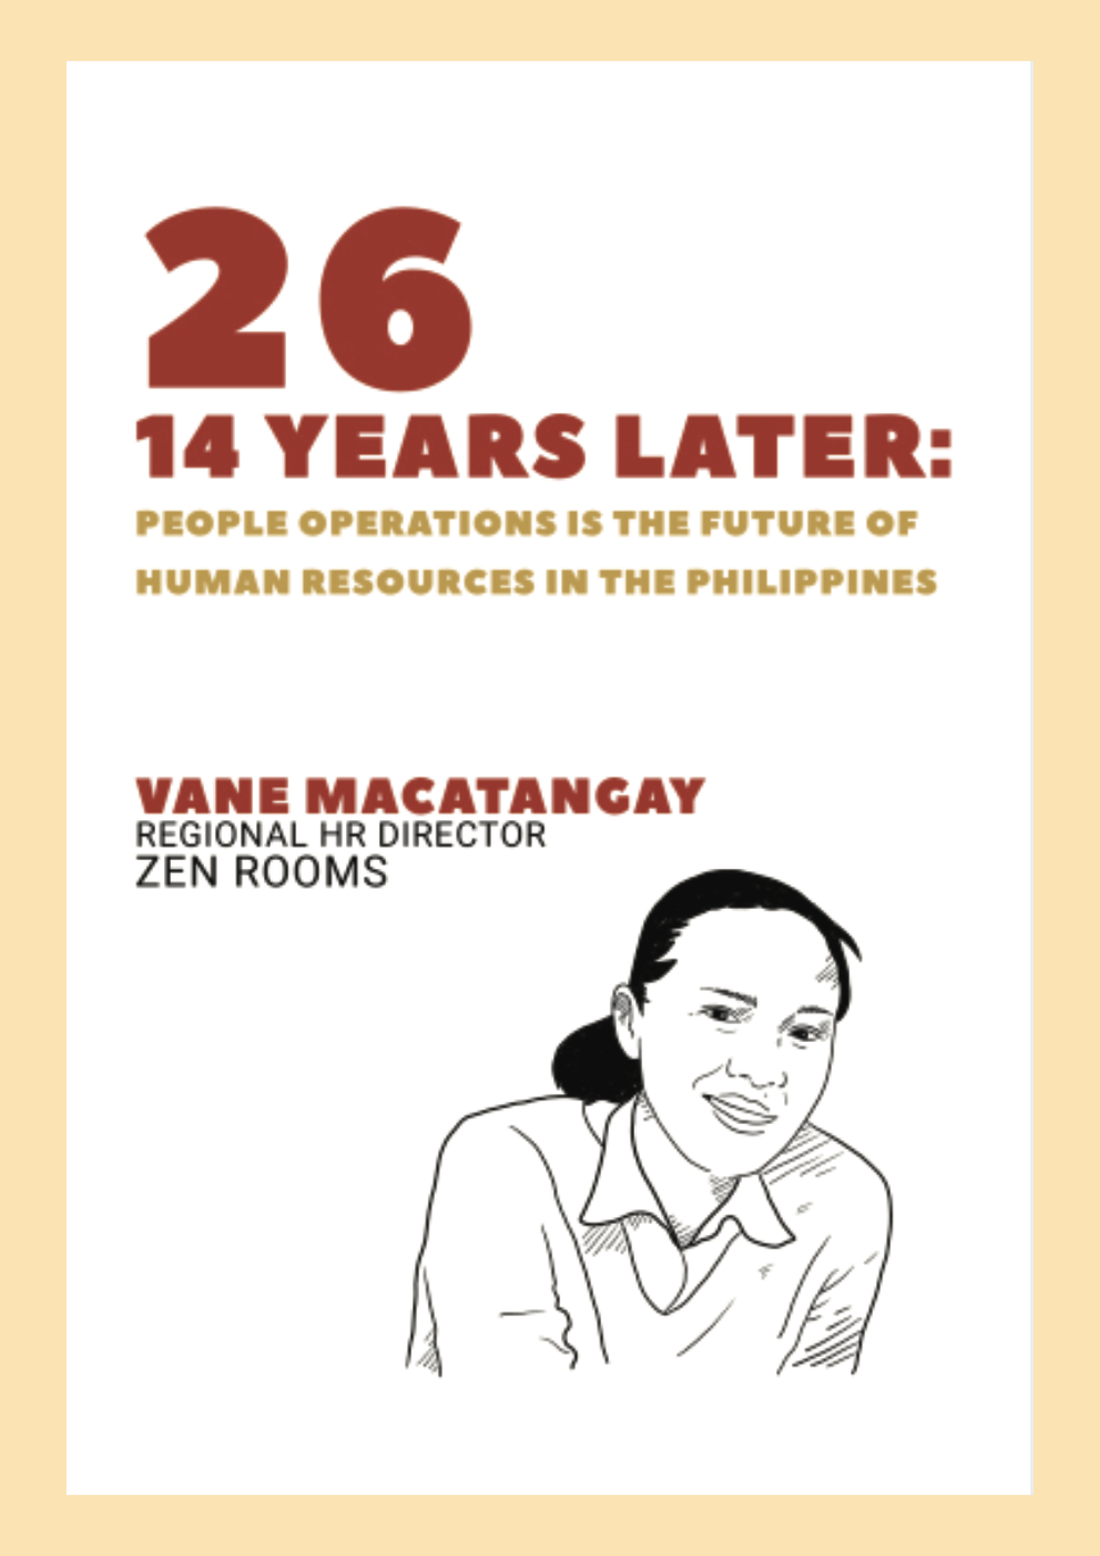 14 Years Later: People Operations is the Future of Human Resources in the Philippines